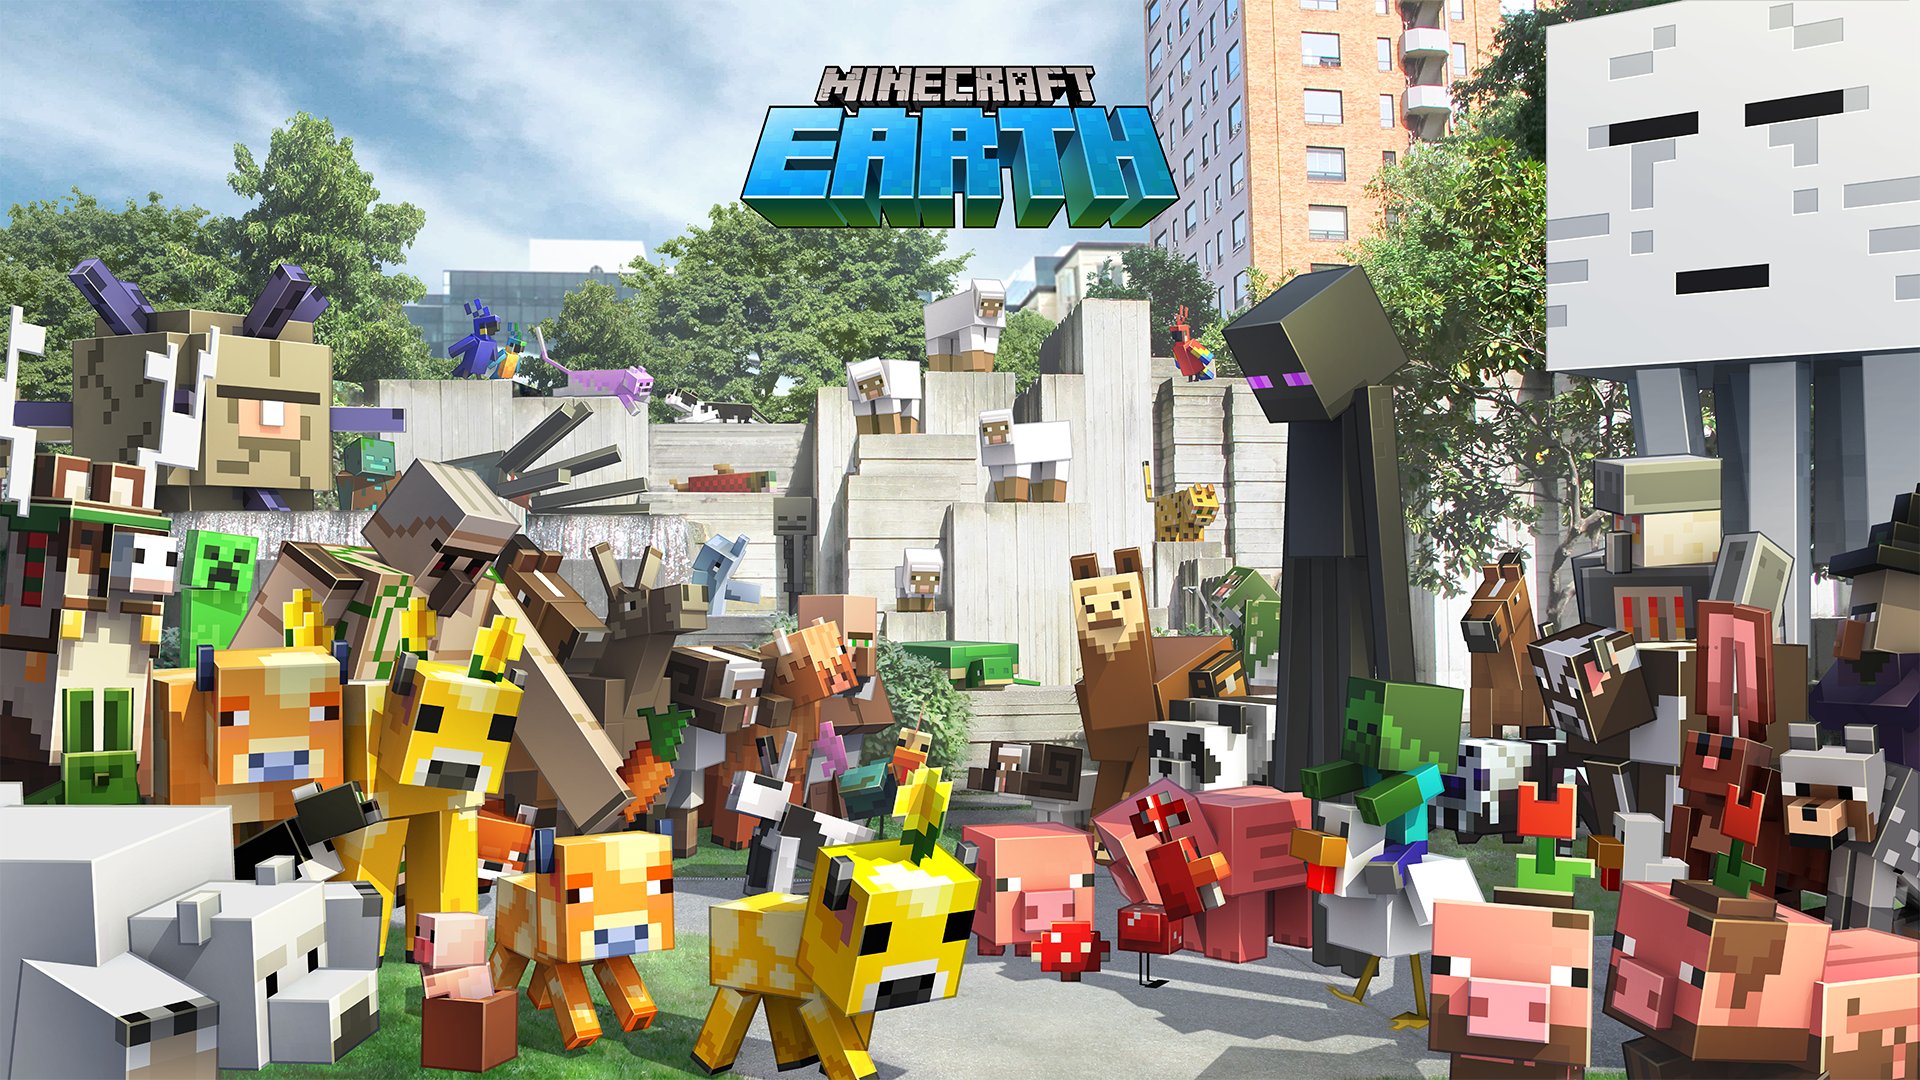 Minecraft Earth PS5 Version Full Game Free Download